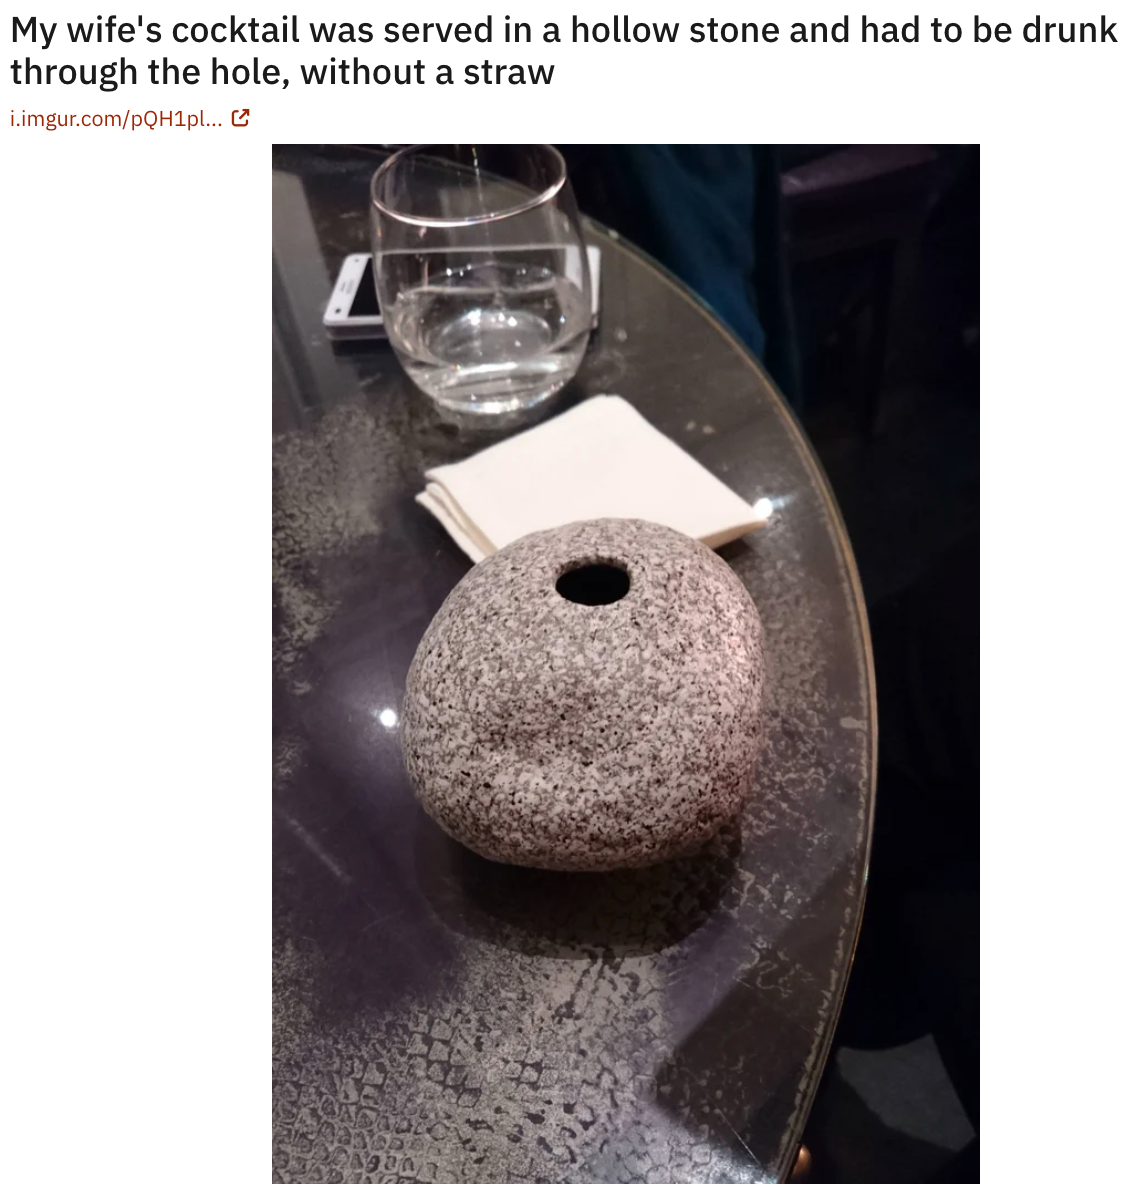 funny food pics - My wife's cocktail was served in a hollow stone and had to be drunk through the hole, without a straw